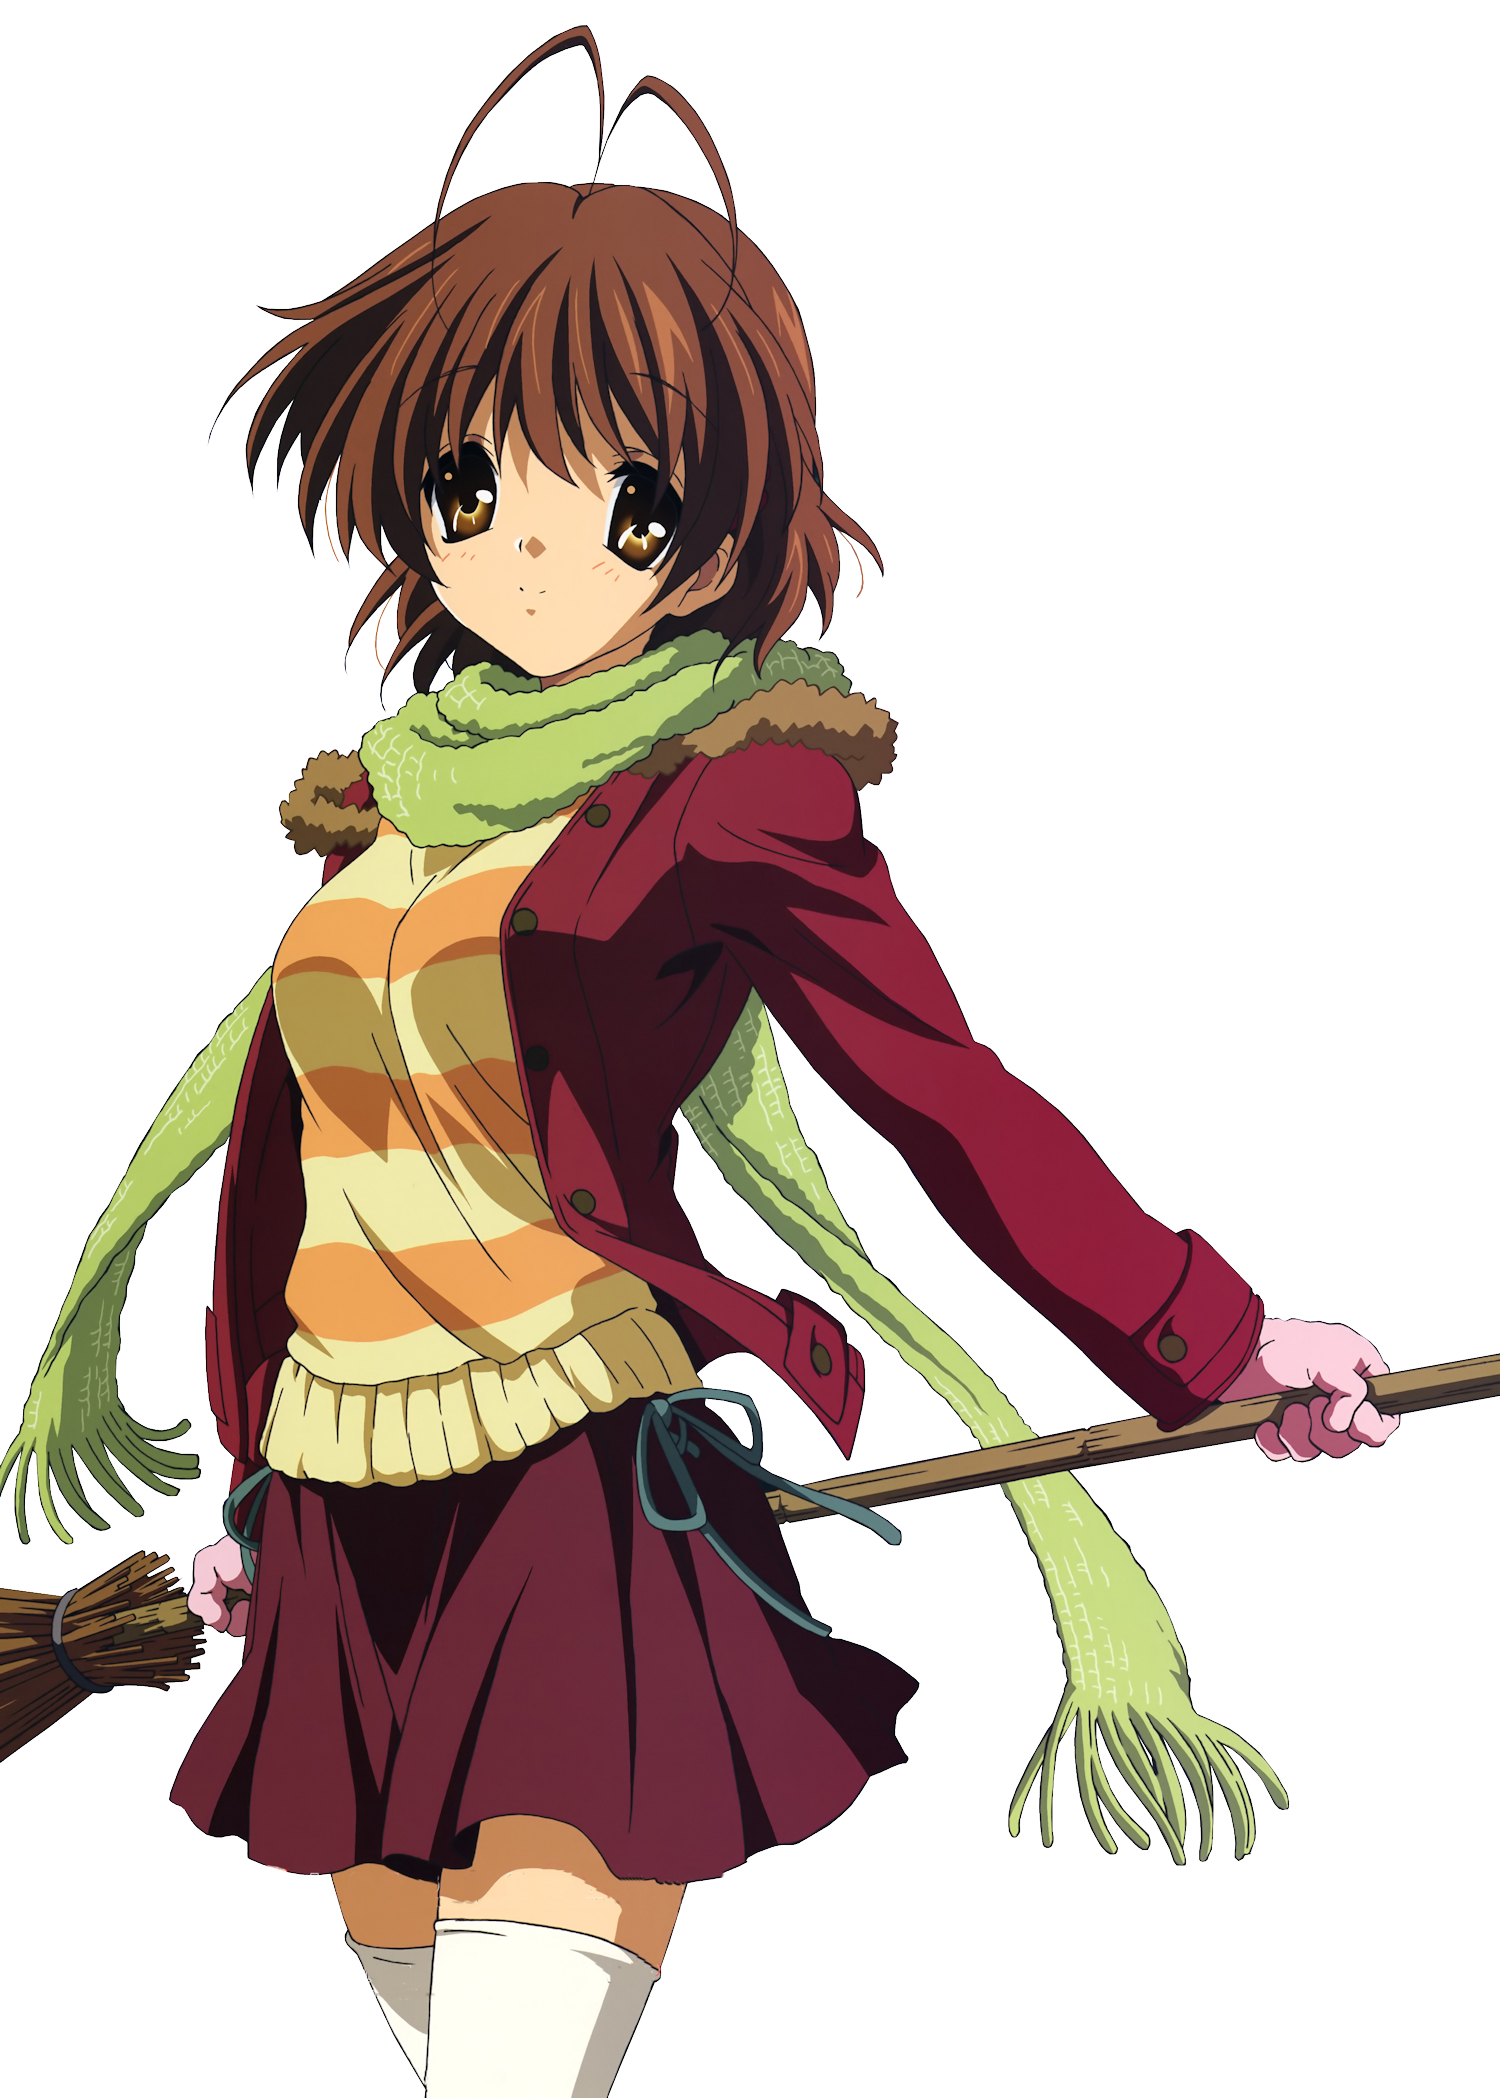 CLANNAD / Characters - TV Tropes